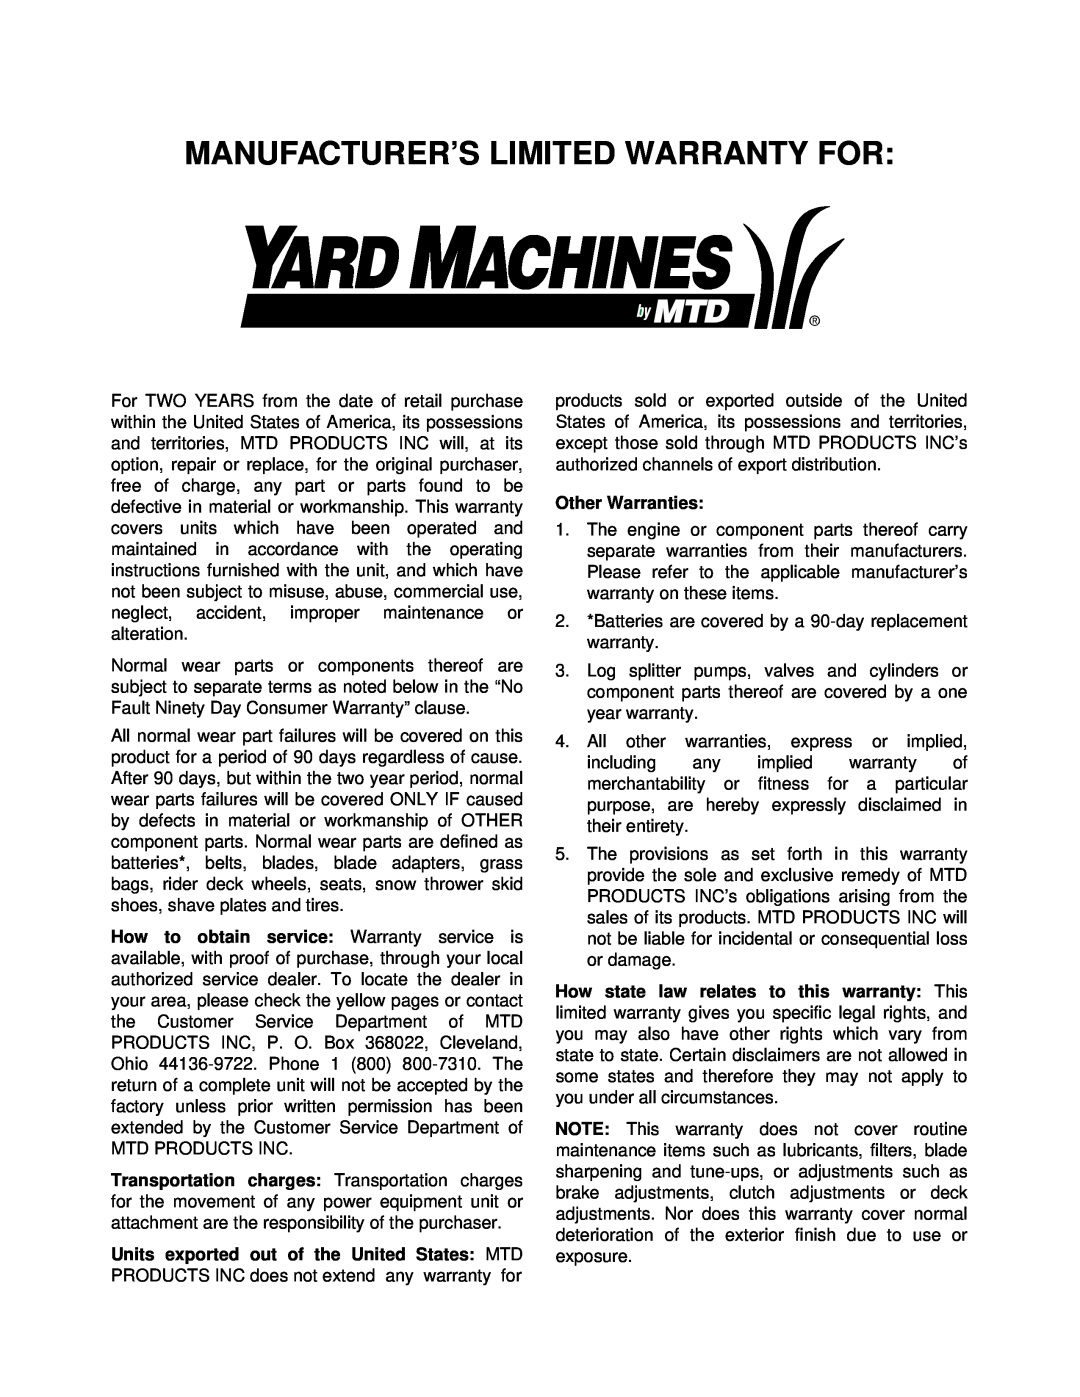 Yard Machines 387, 389, 370, 378 manual Manufacturer’S Limited Warranty For 